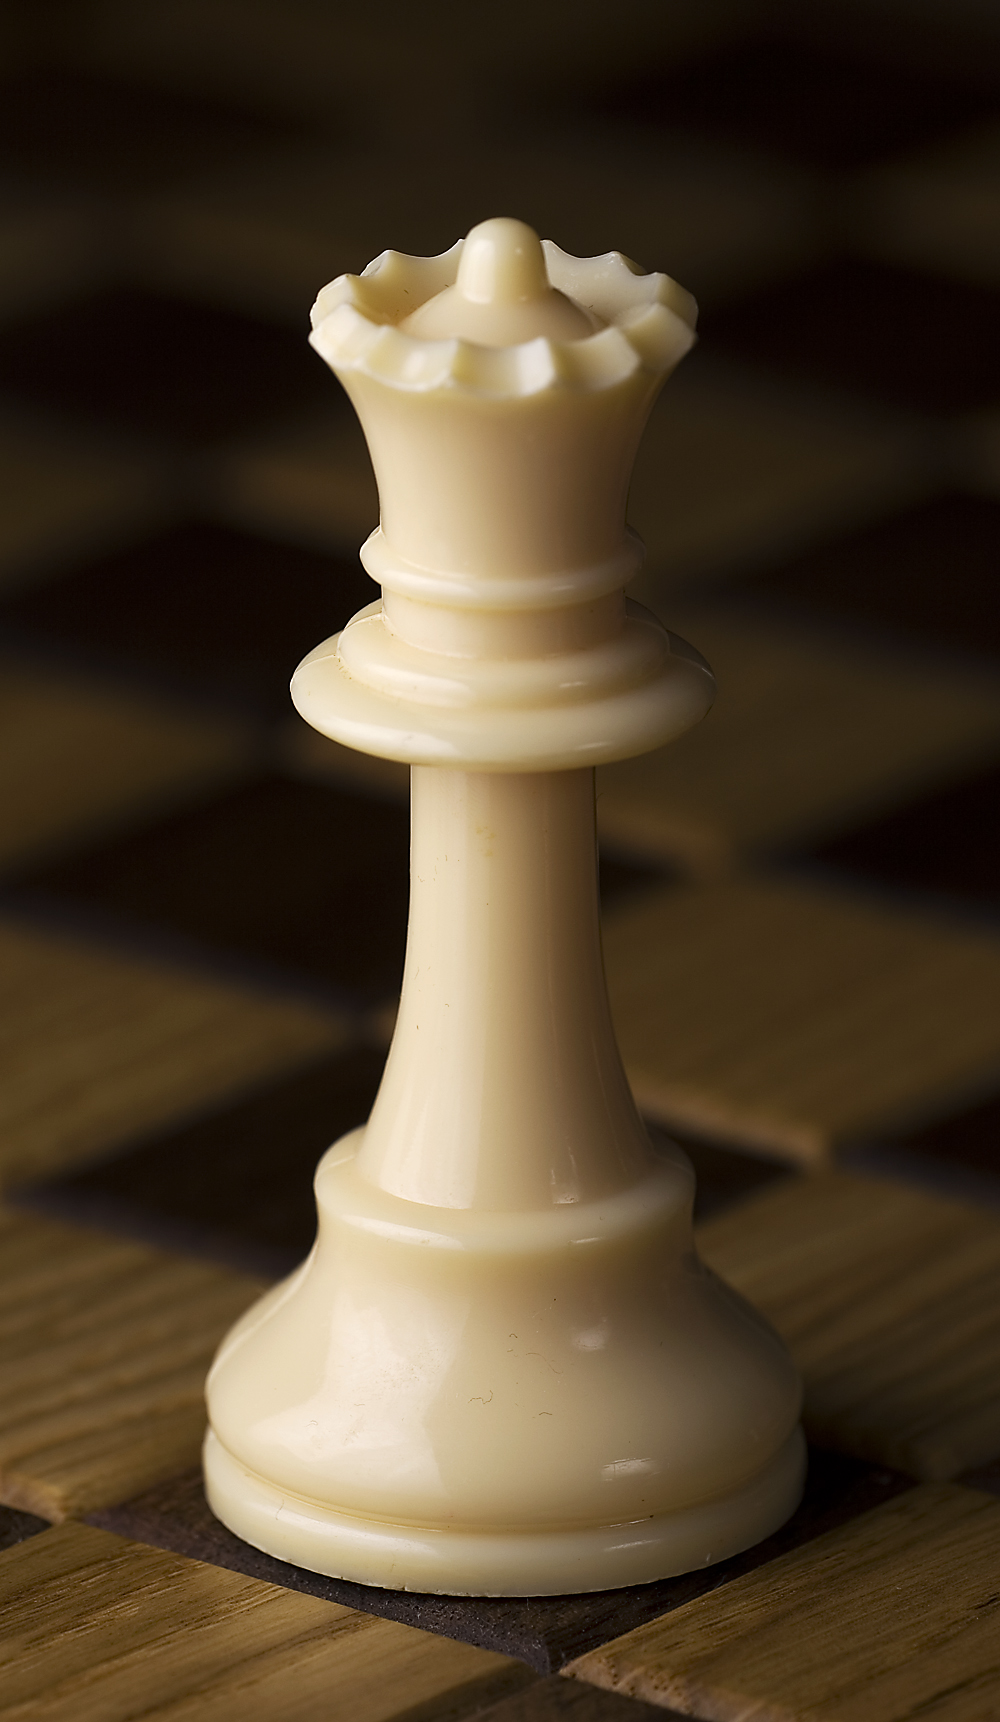 http://upload.wikimedia.org/wikipedia/commons/a/af/Chess_piece_-_White_queen.jpg